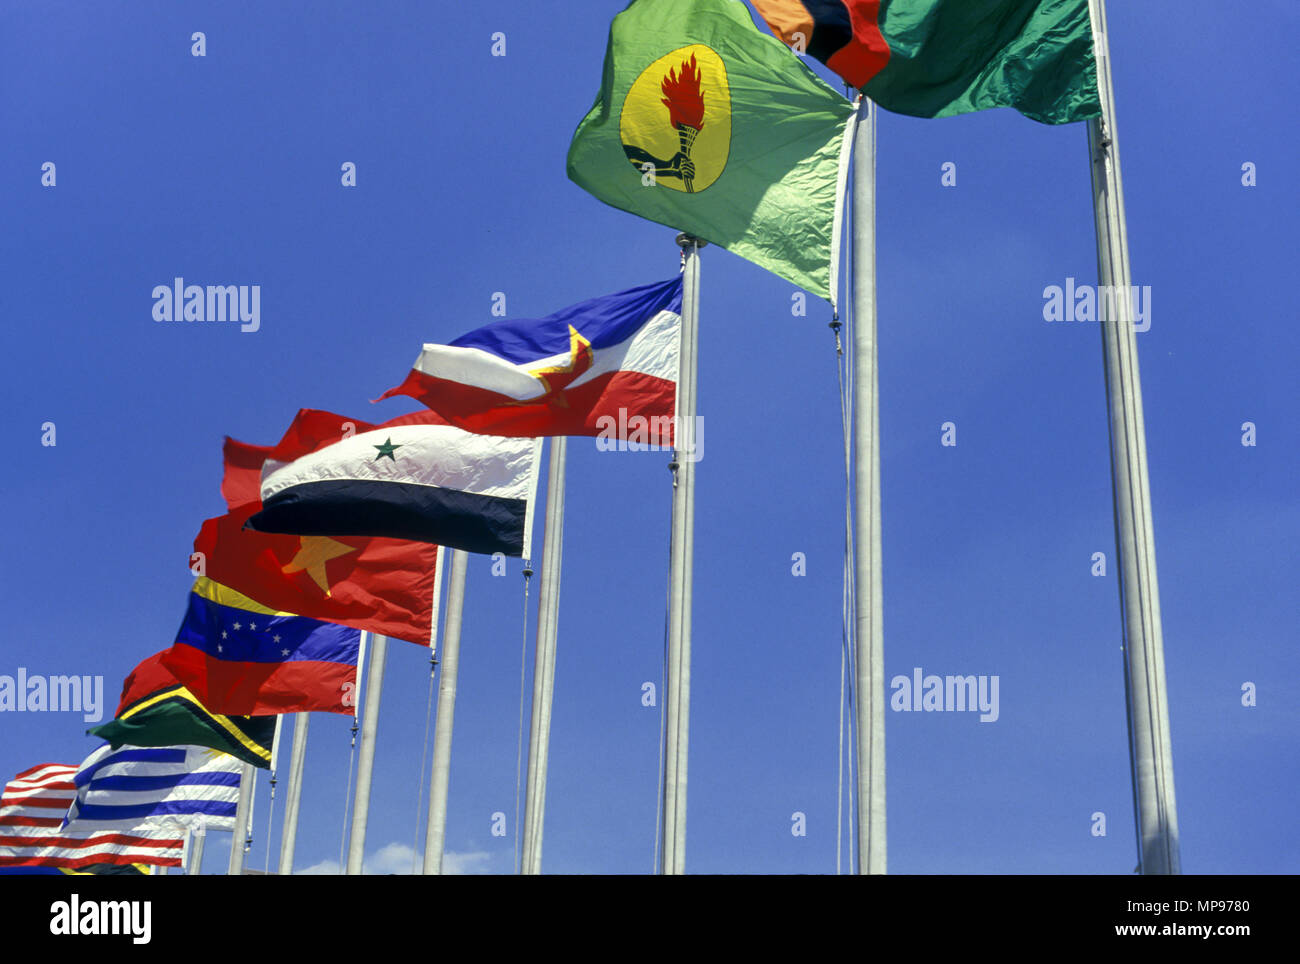 1988 HISTORICAL NATIONAL FLAGS BLUE SKY UNITED NATIONS HEADQUARTERS FIRST AVENUE MANHATTAN NEW YORK CITY USA Stock Photo